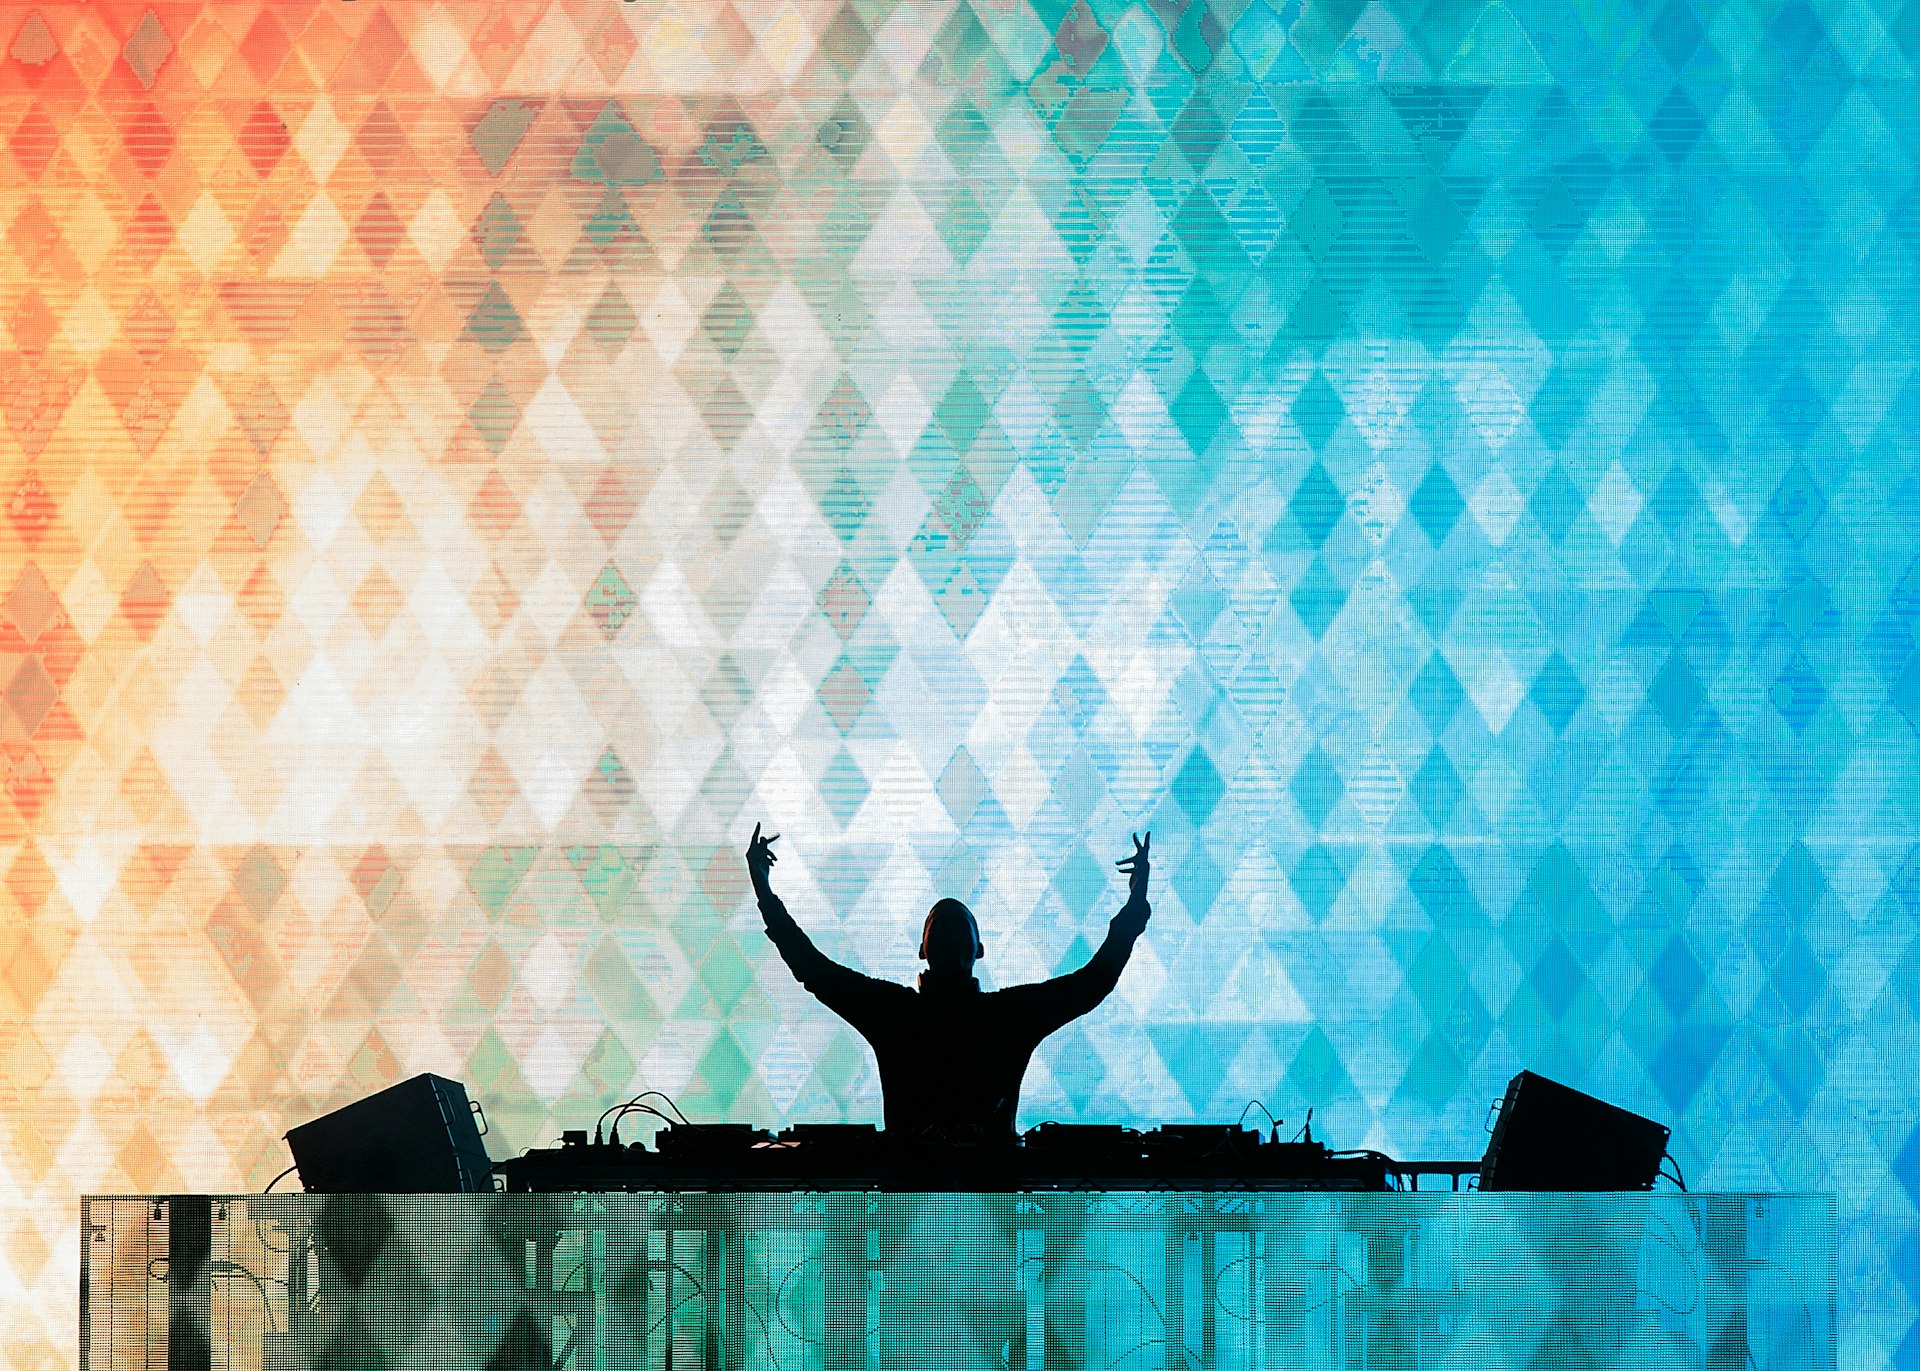 A DJ puts his hands in the air in front of a colorful light display